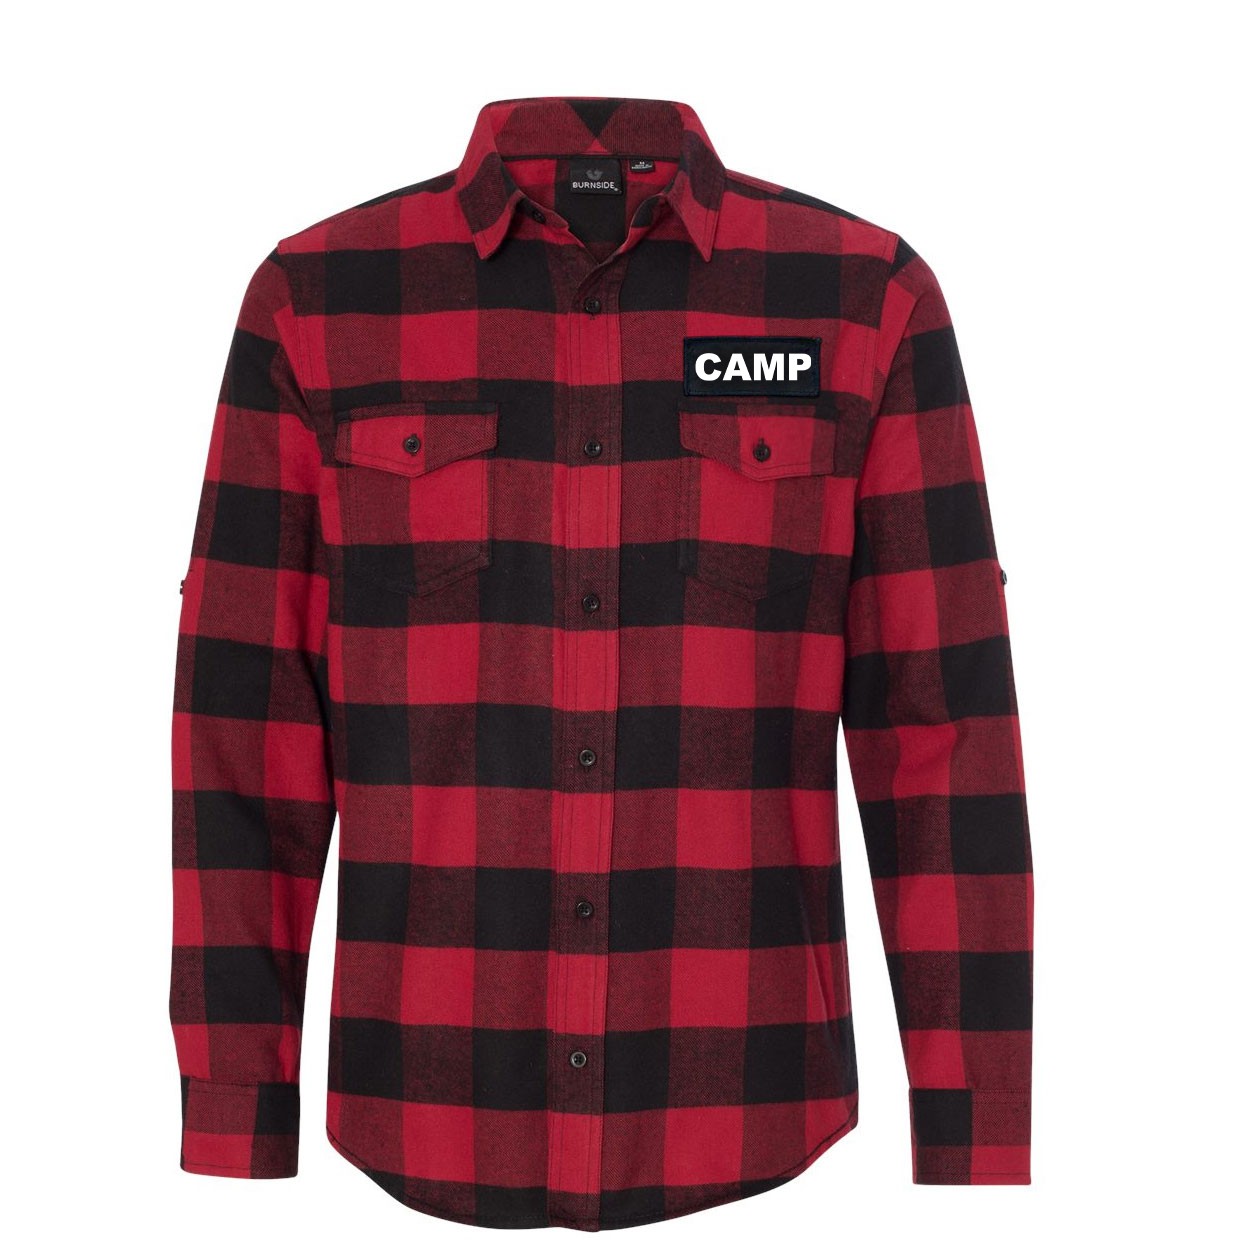 Camp Brand Logo Classic Unisex Long Sleeve Woven Patch Flannel Shirt Red/Black Buffalo (White Logo)